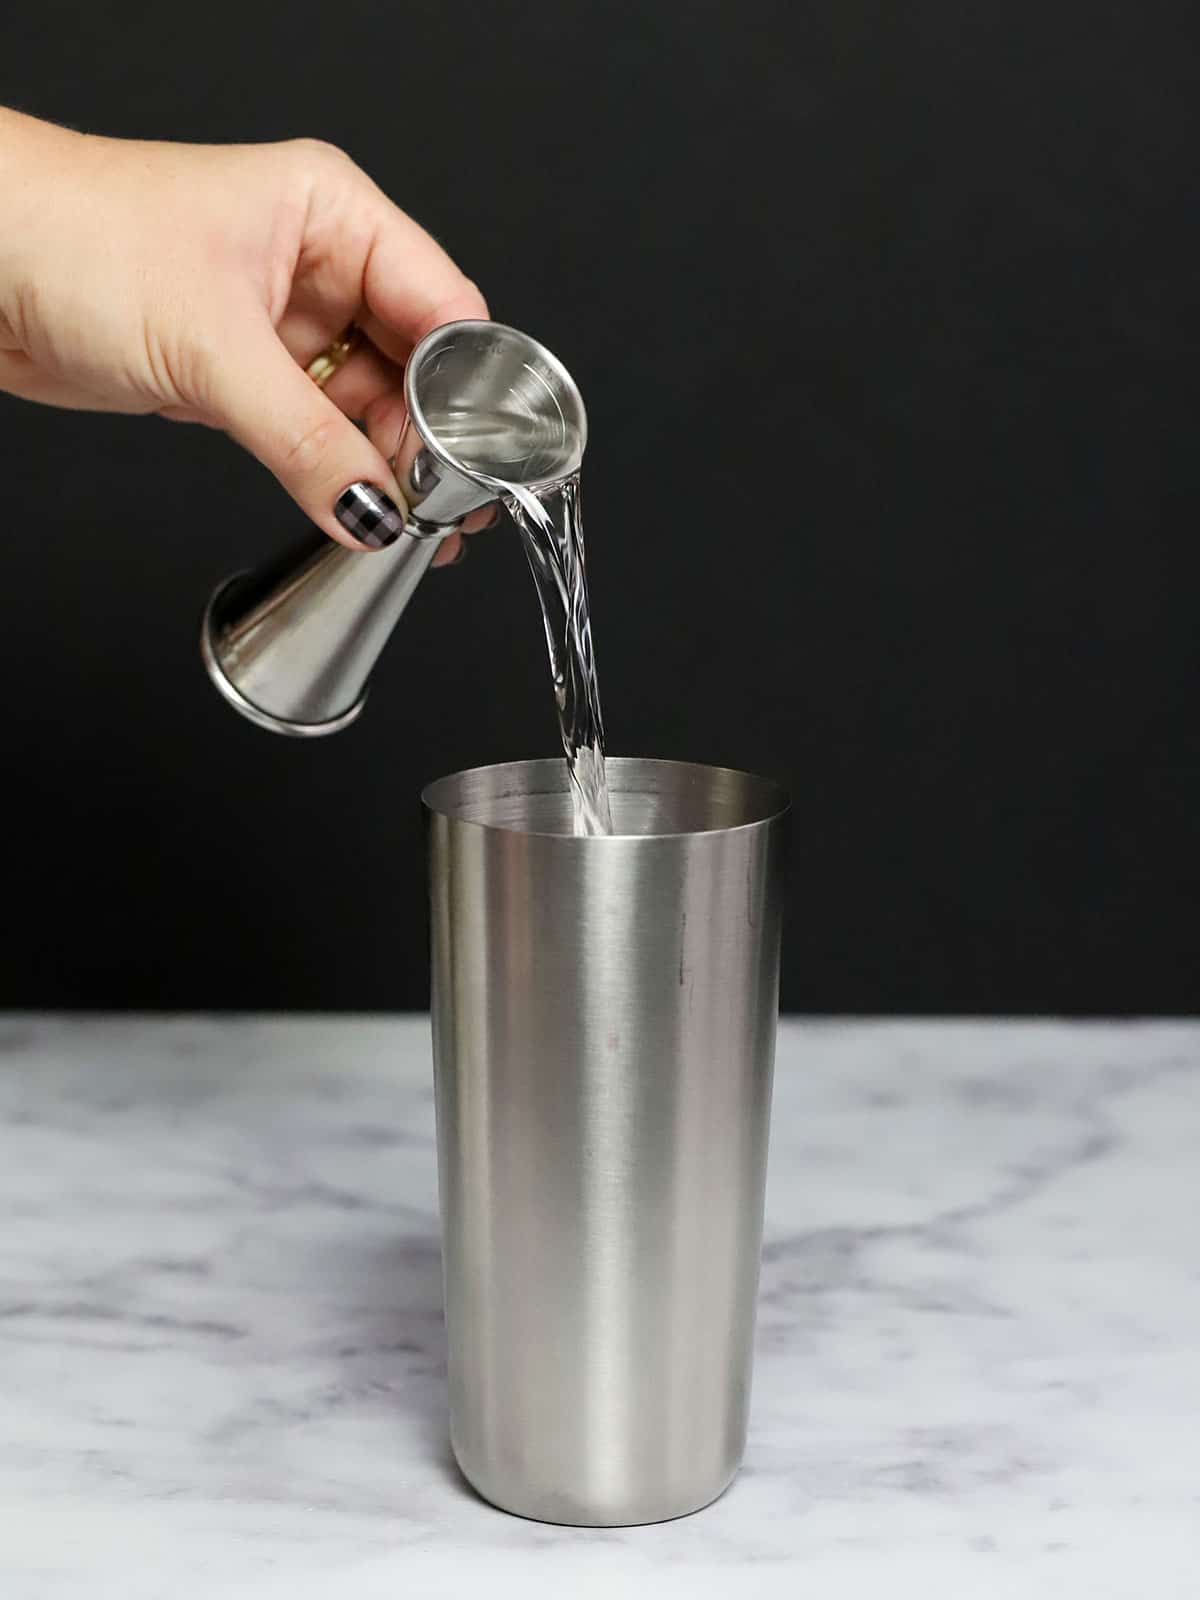 Vodka being poured into a cocktail shaker